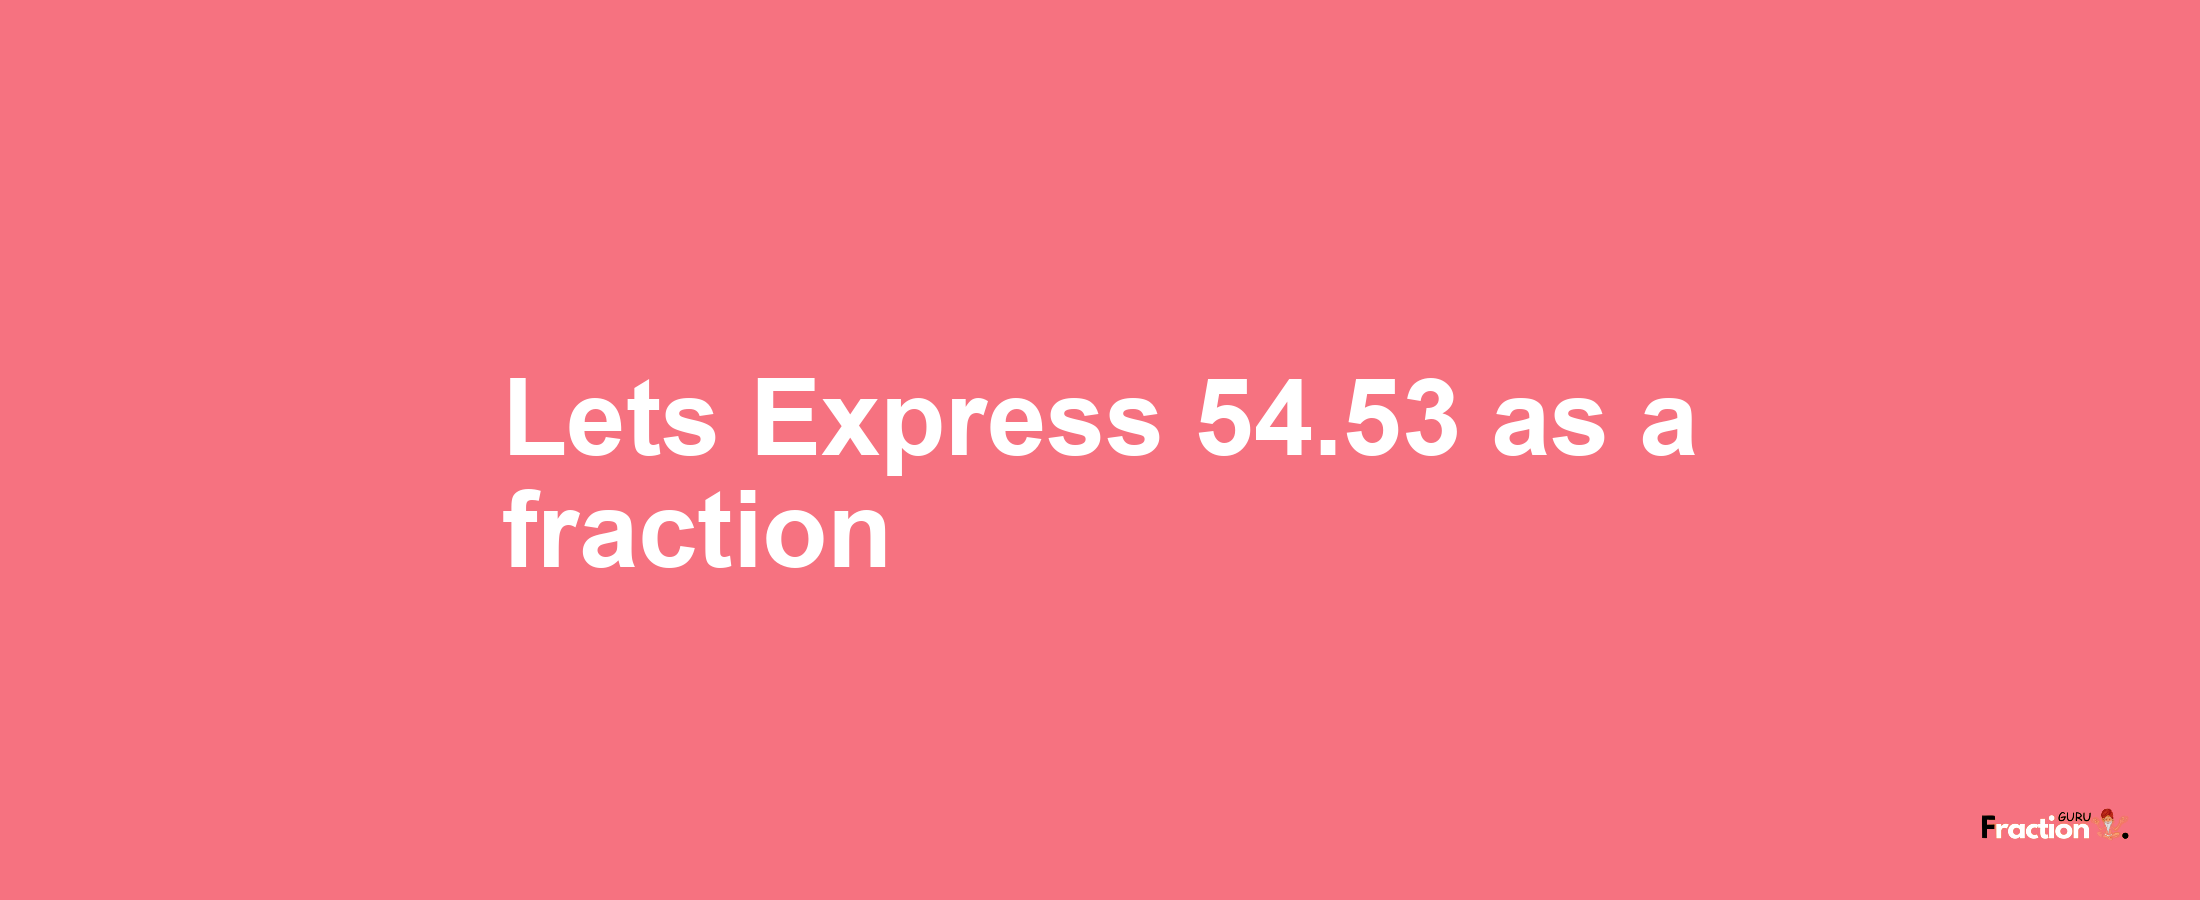 Lets Express 54.53 as afraction